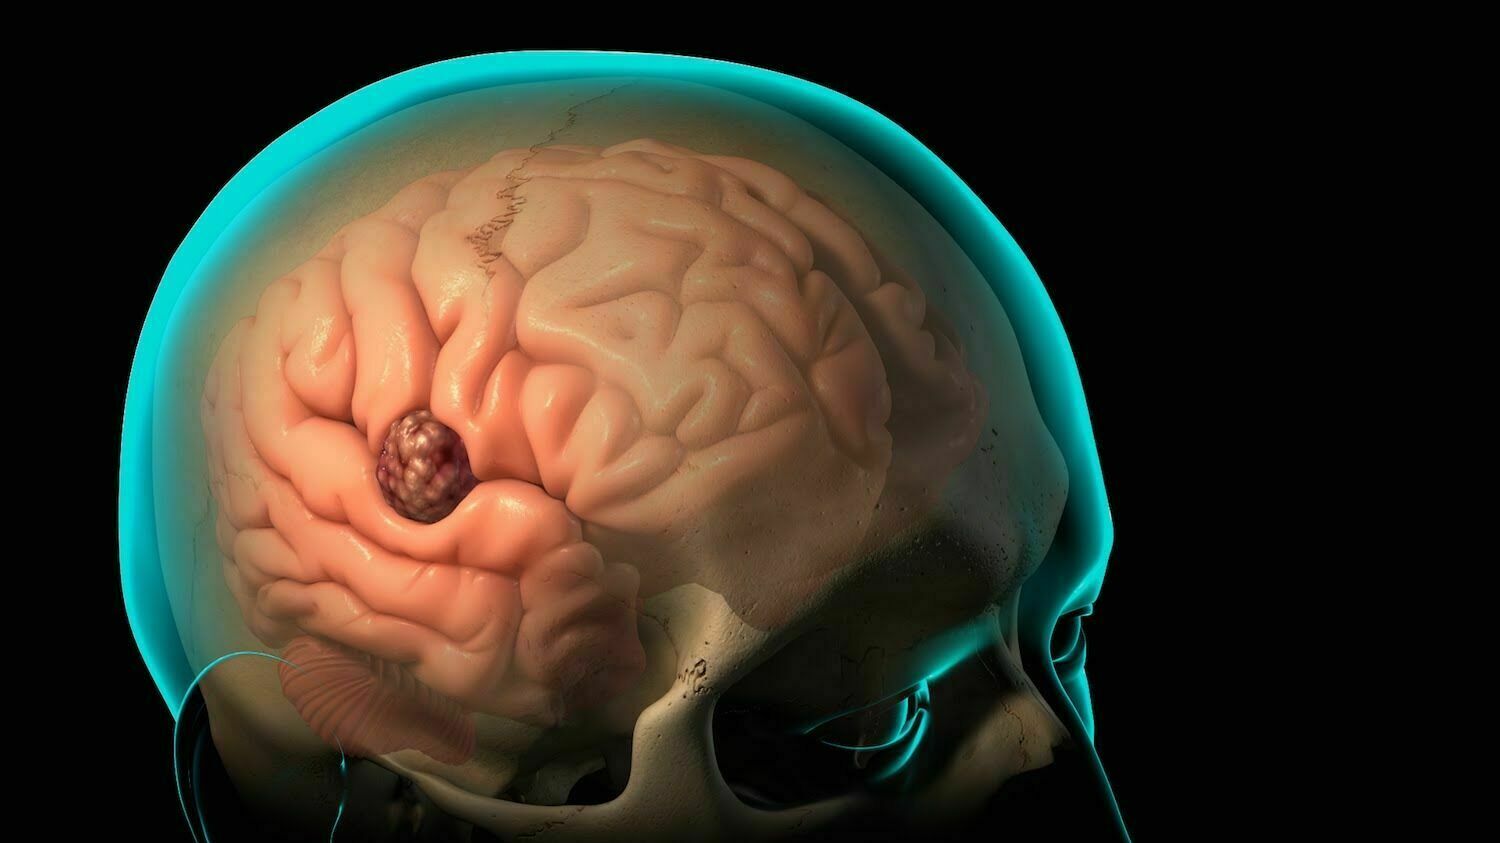 Cheap and simple: Russian scientists have learned to detect a brain tumor with 100% accuracy